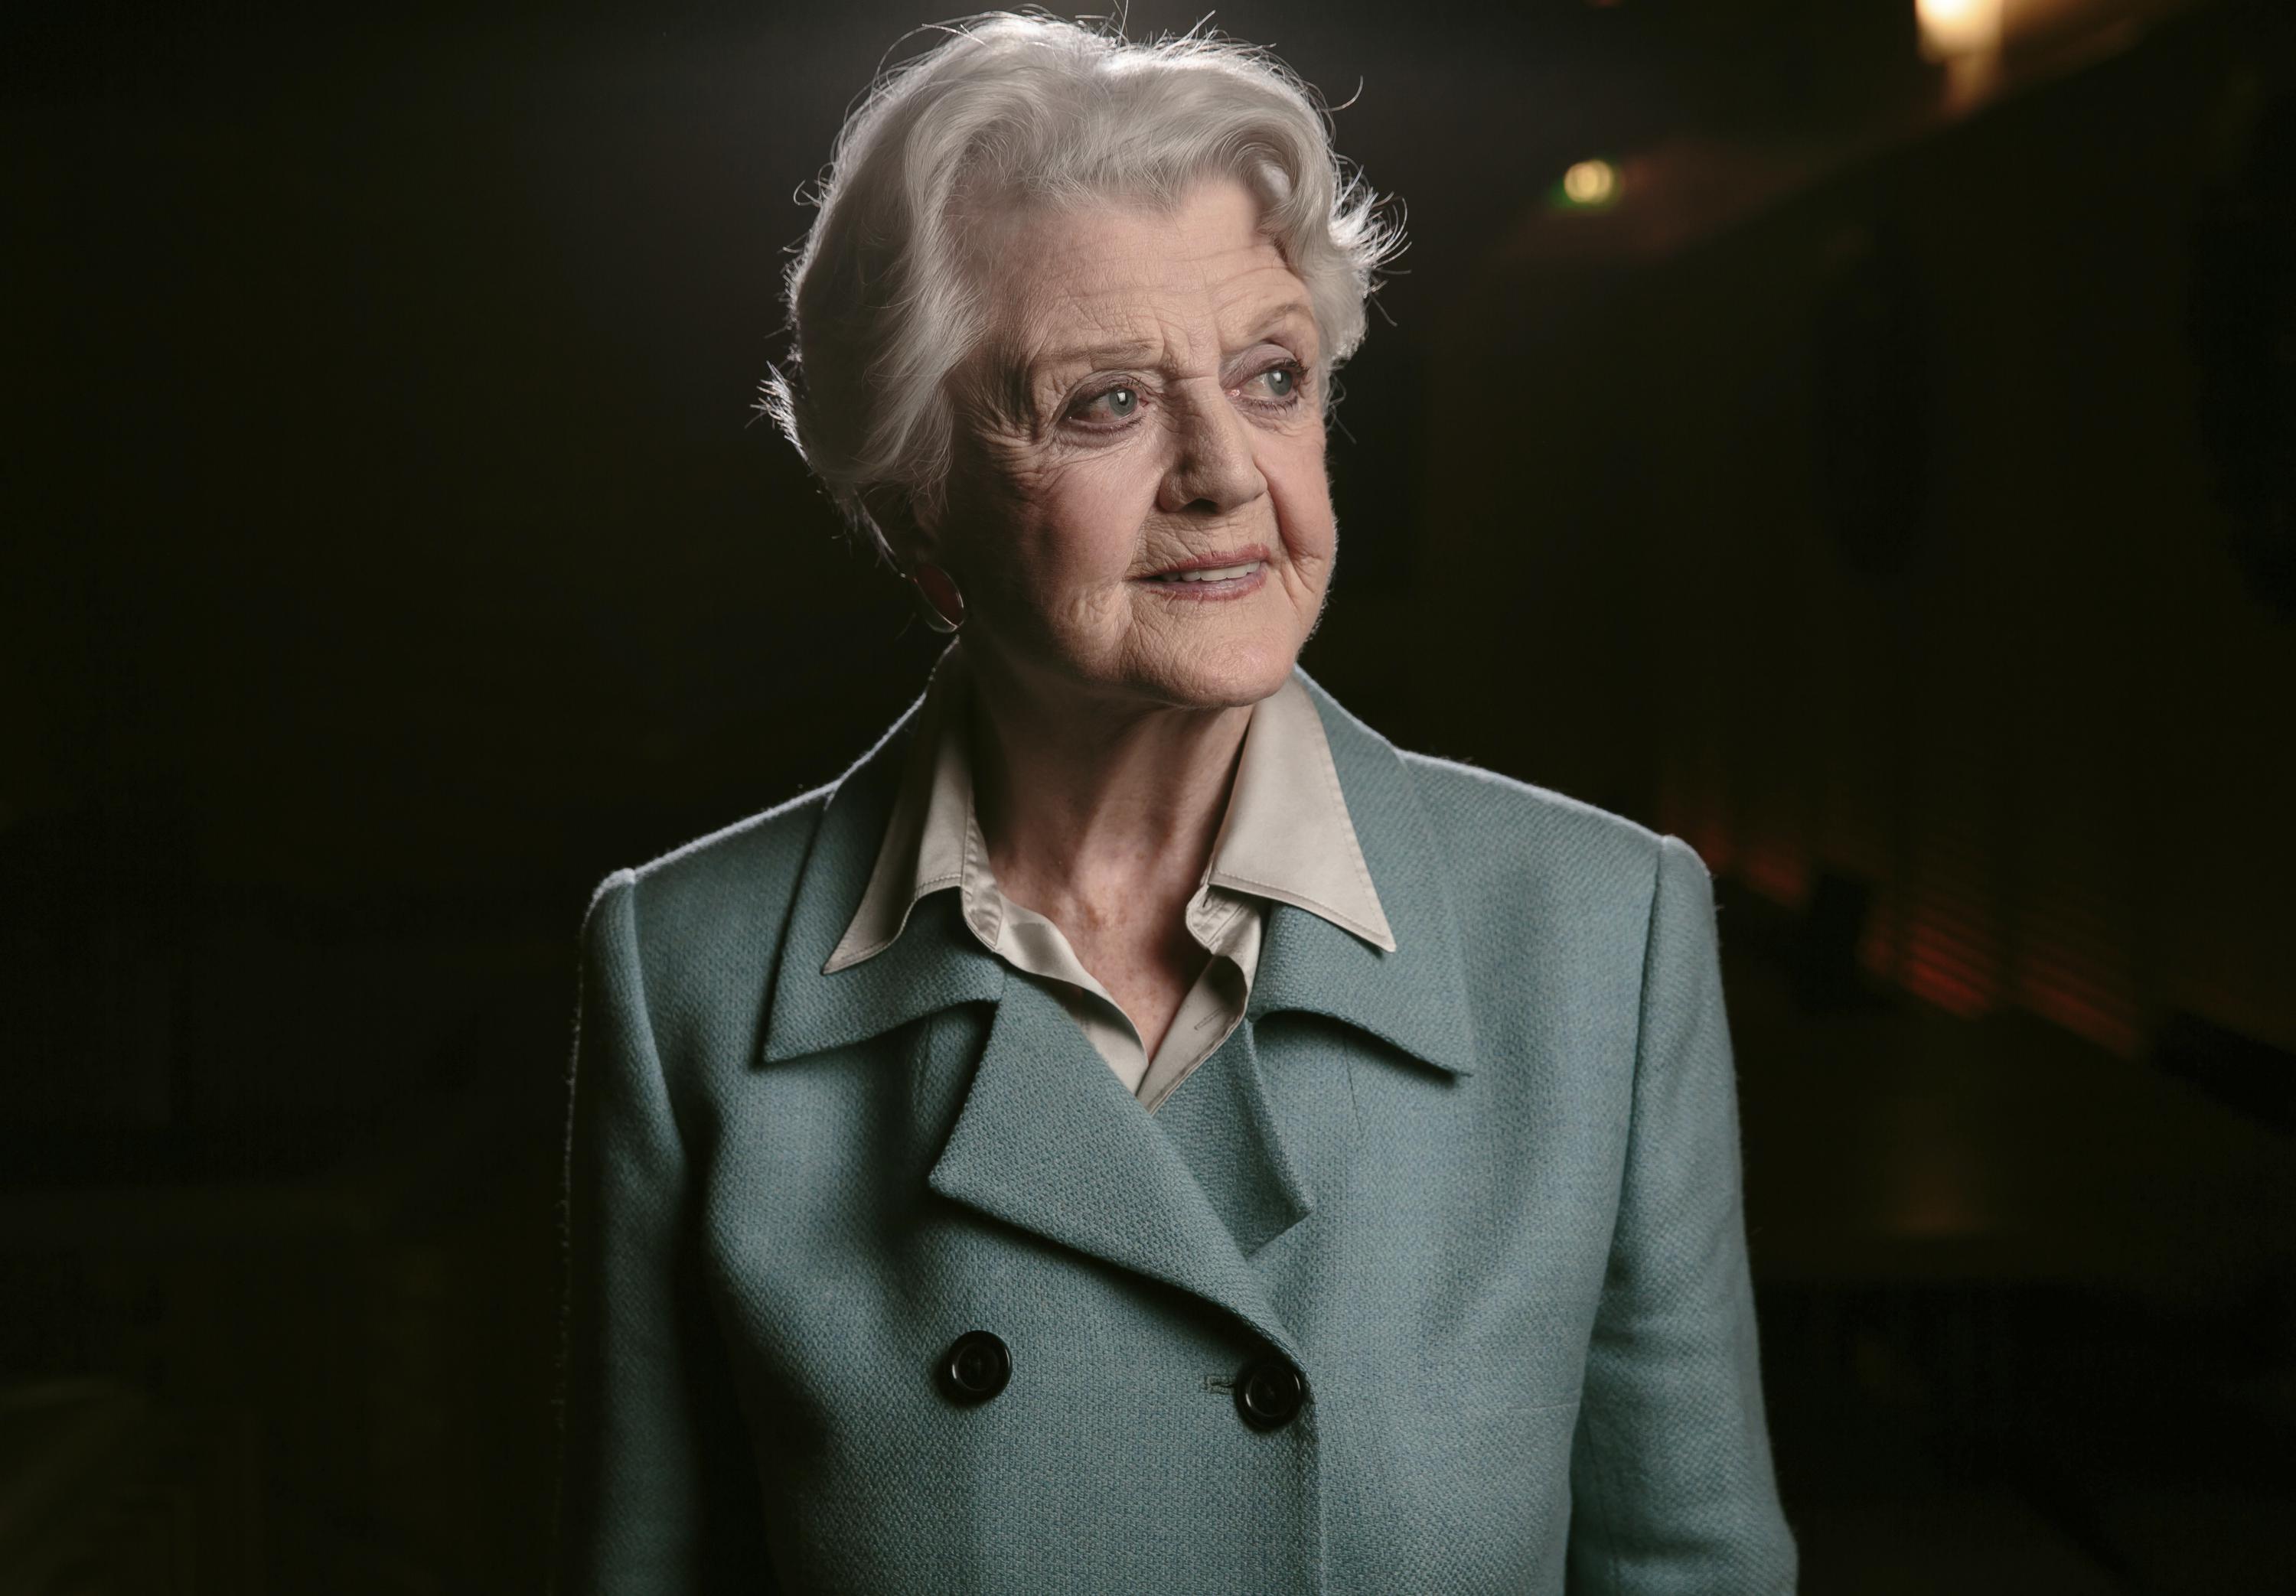 Angela Lansbury Passed Away - Details Of Her Death And Career